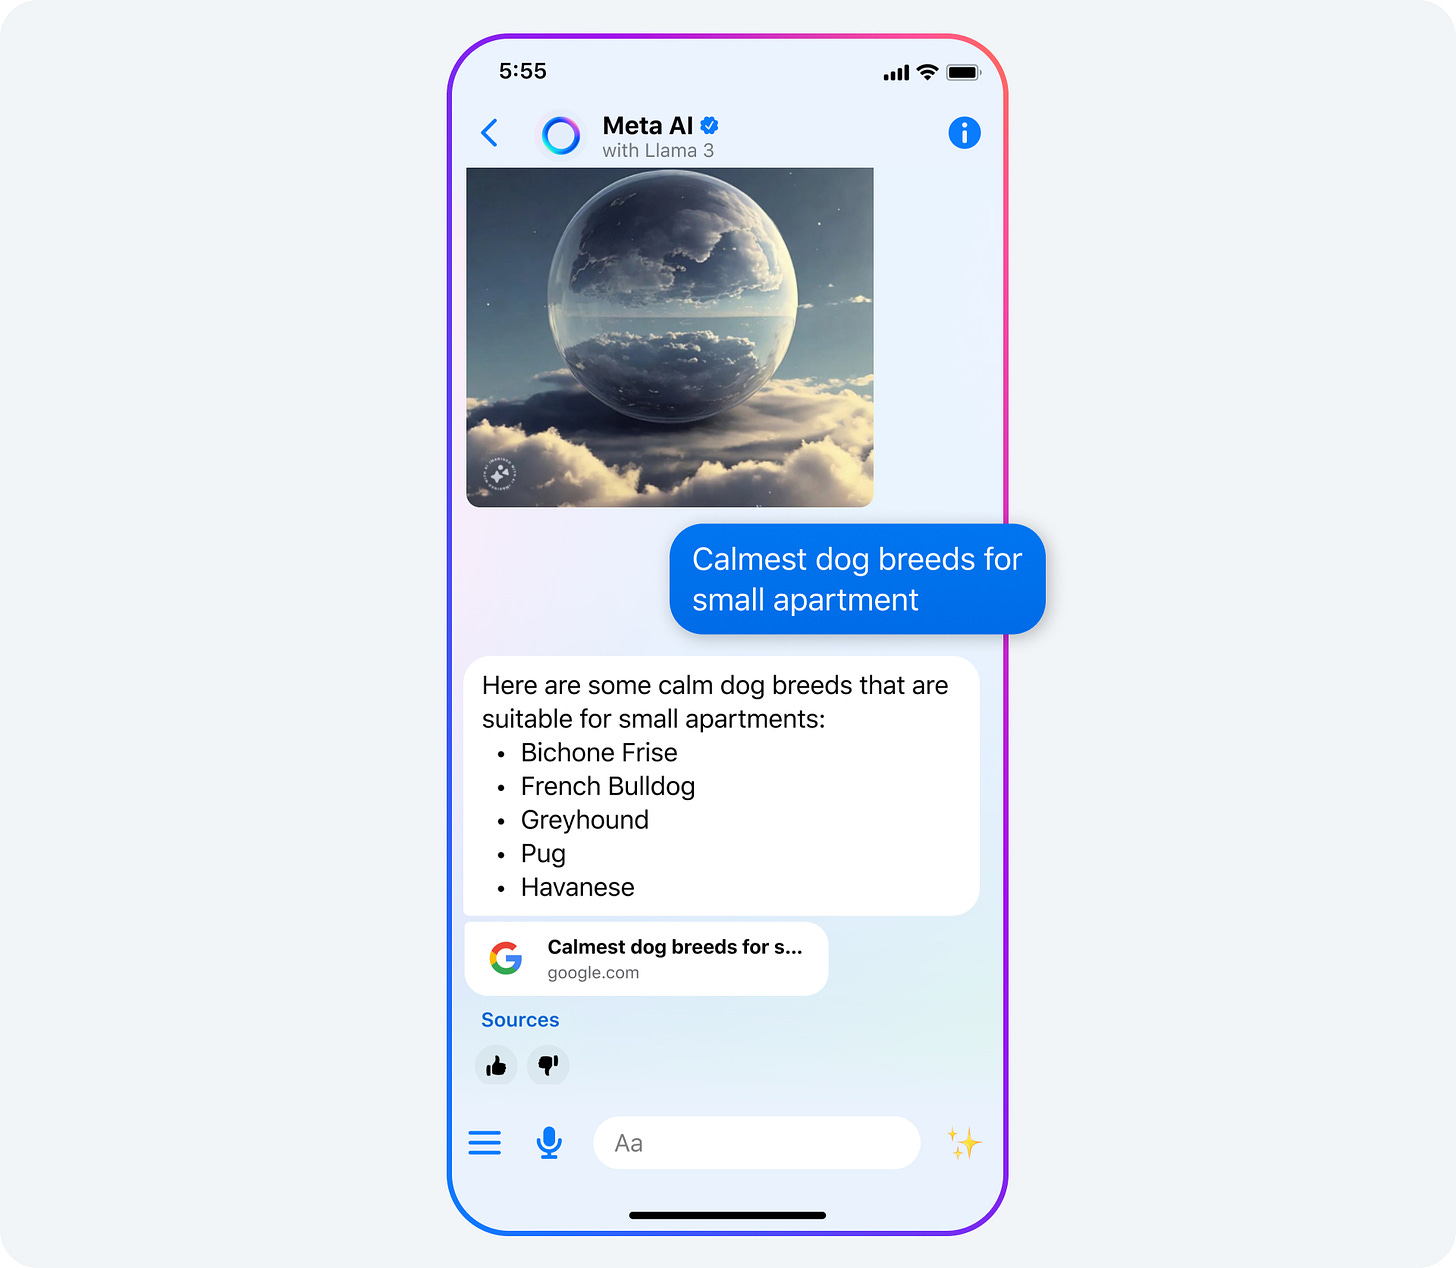 Phone screen showing a Messenger chat with Meta AI